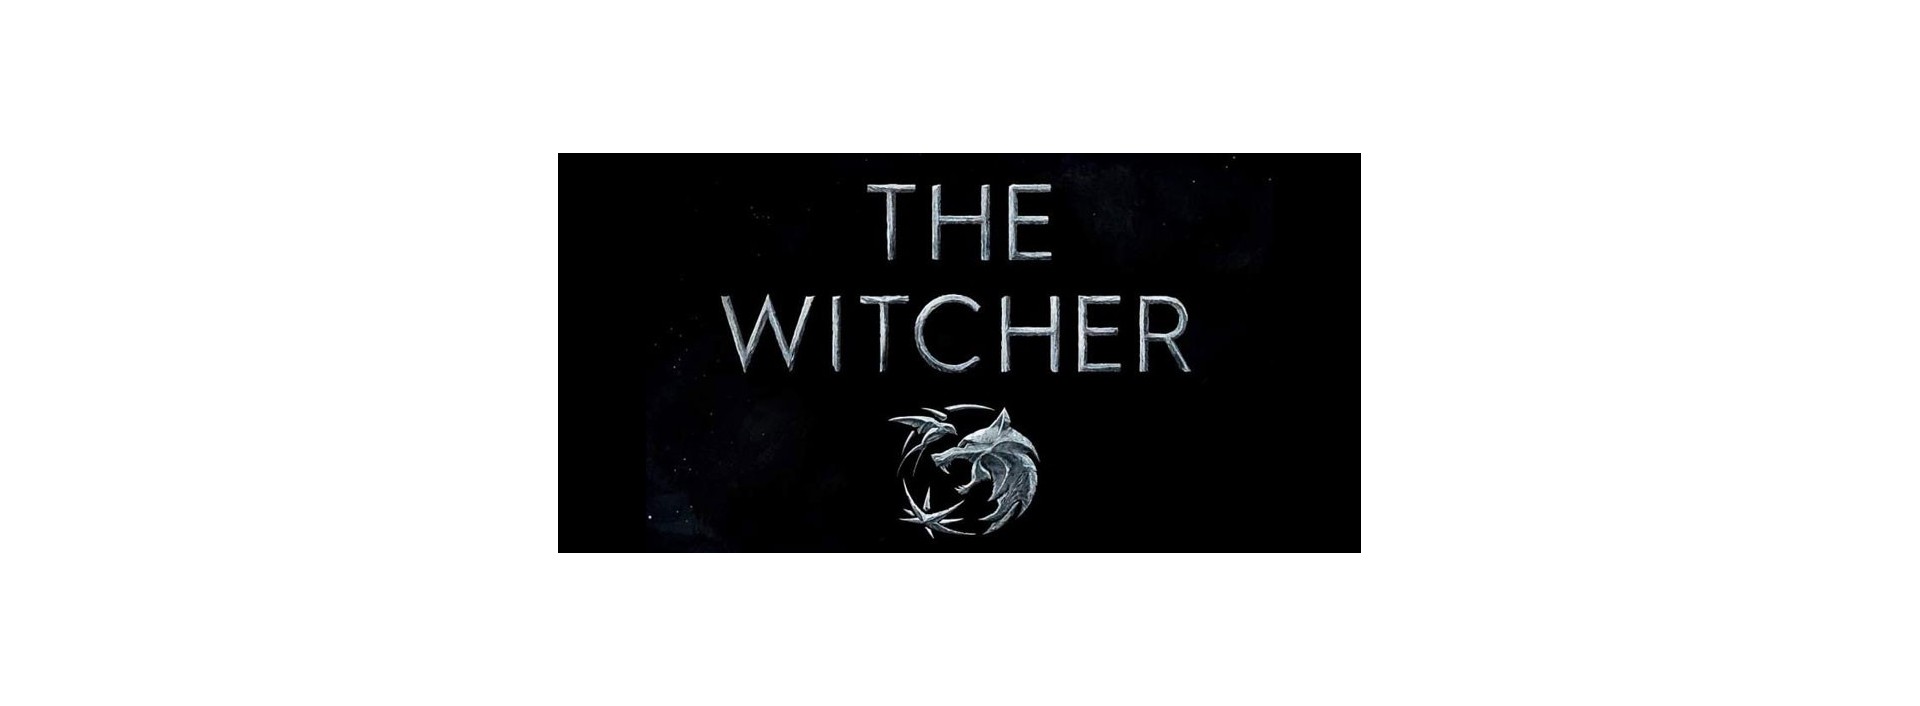 THE WITCHER